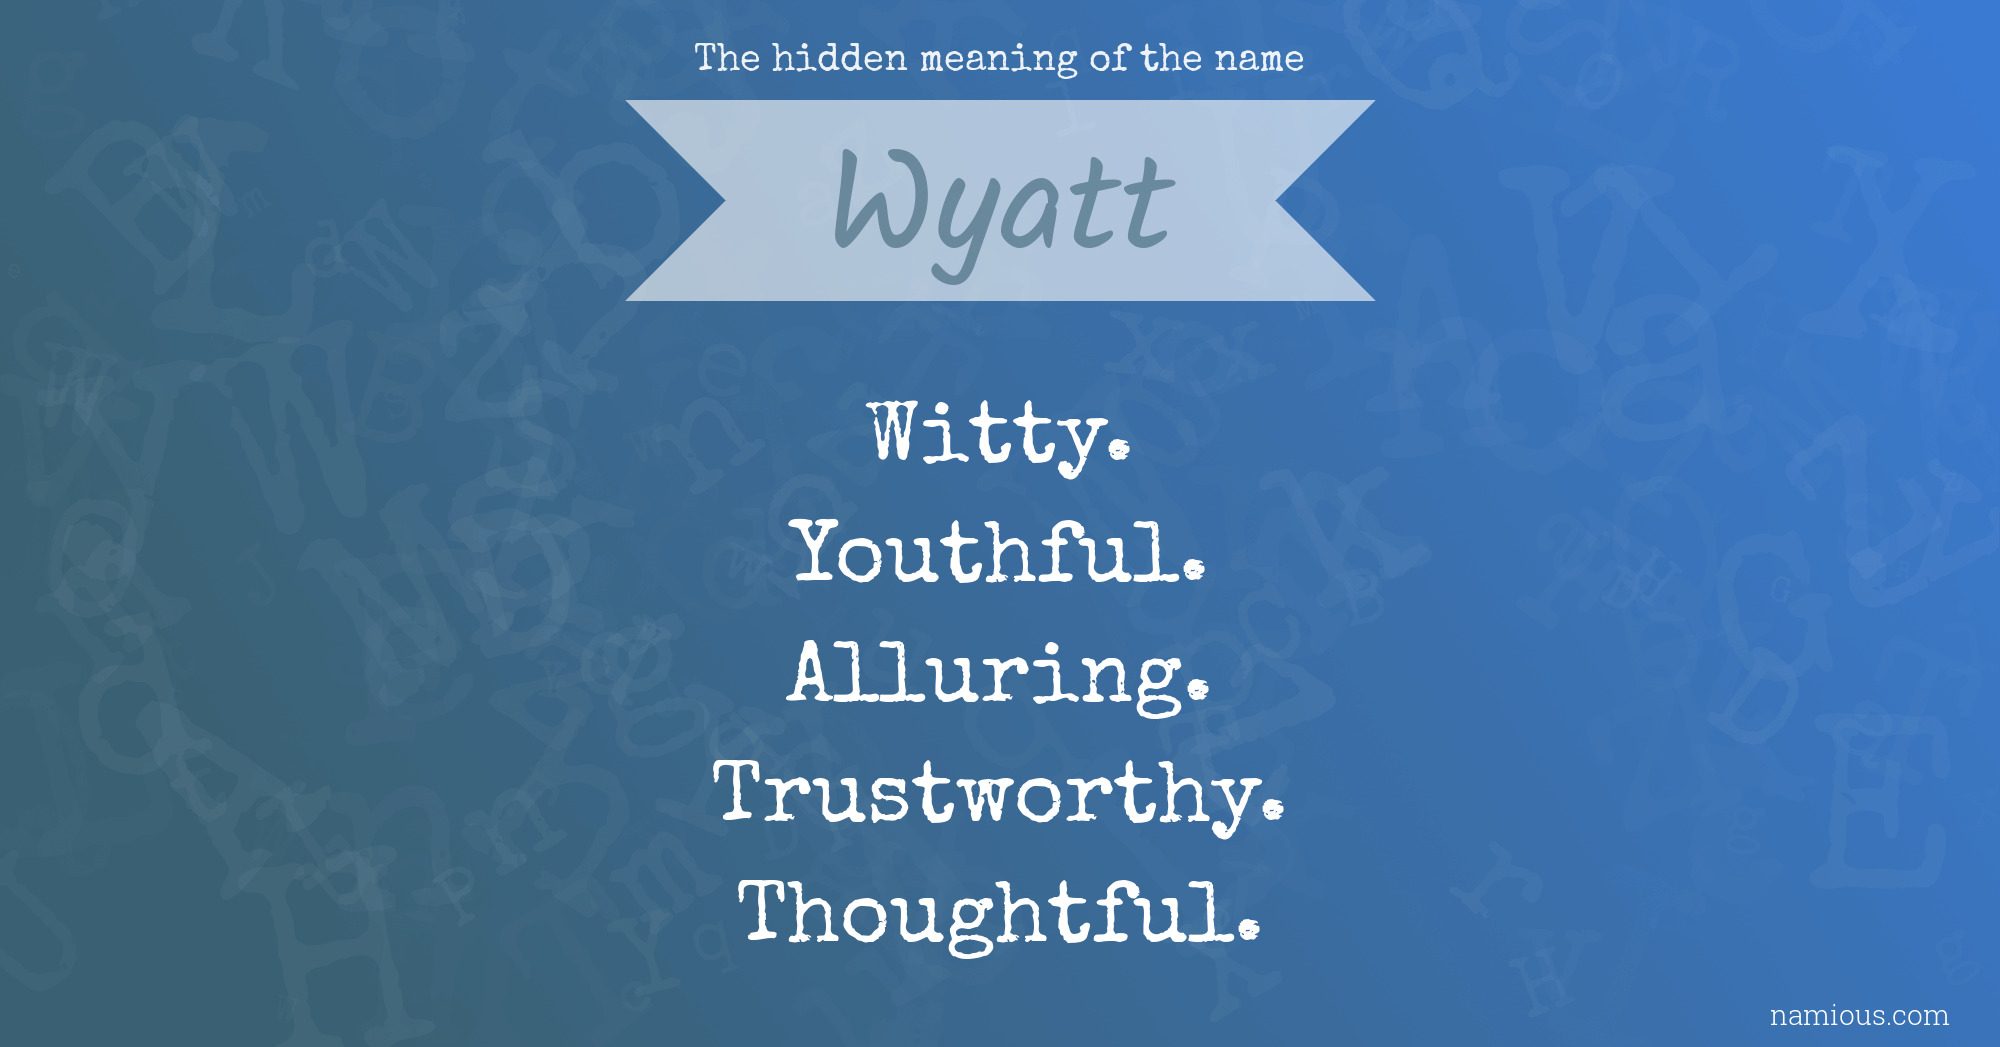 The hidden meaning of the name Wyatt